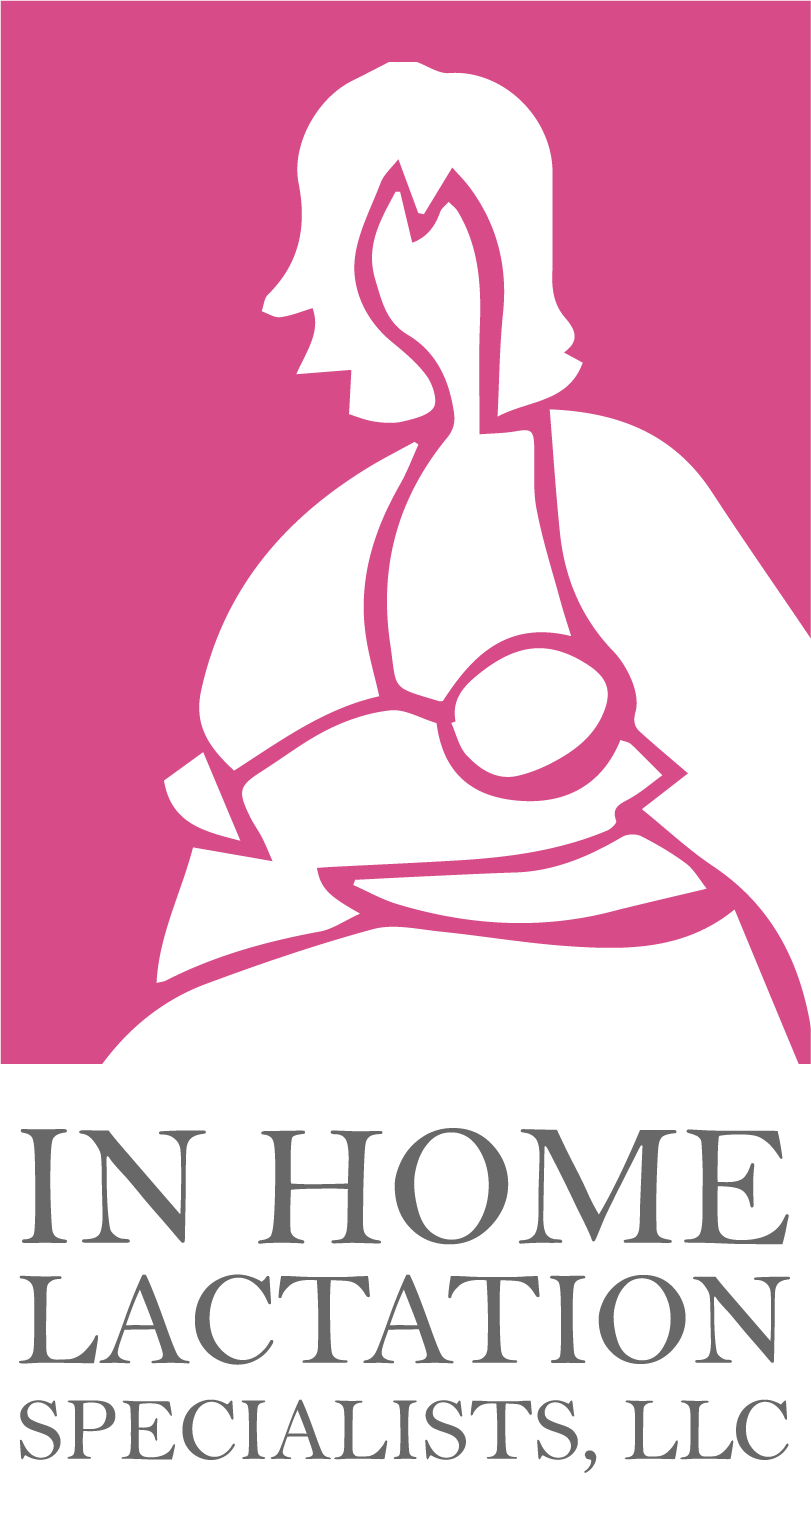 IN HOME LACTATION SPECIALISTS, LLC - Home Based Lactation Consultant